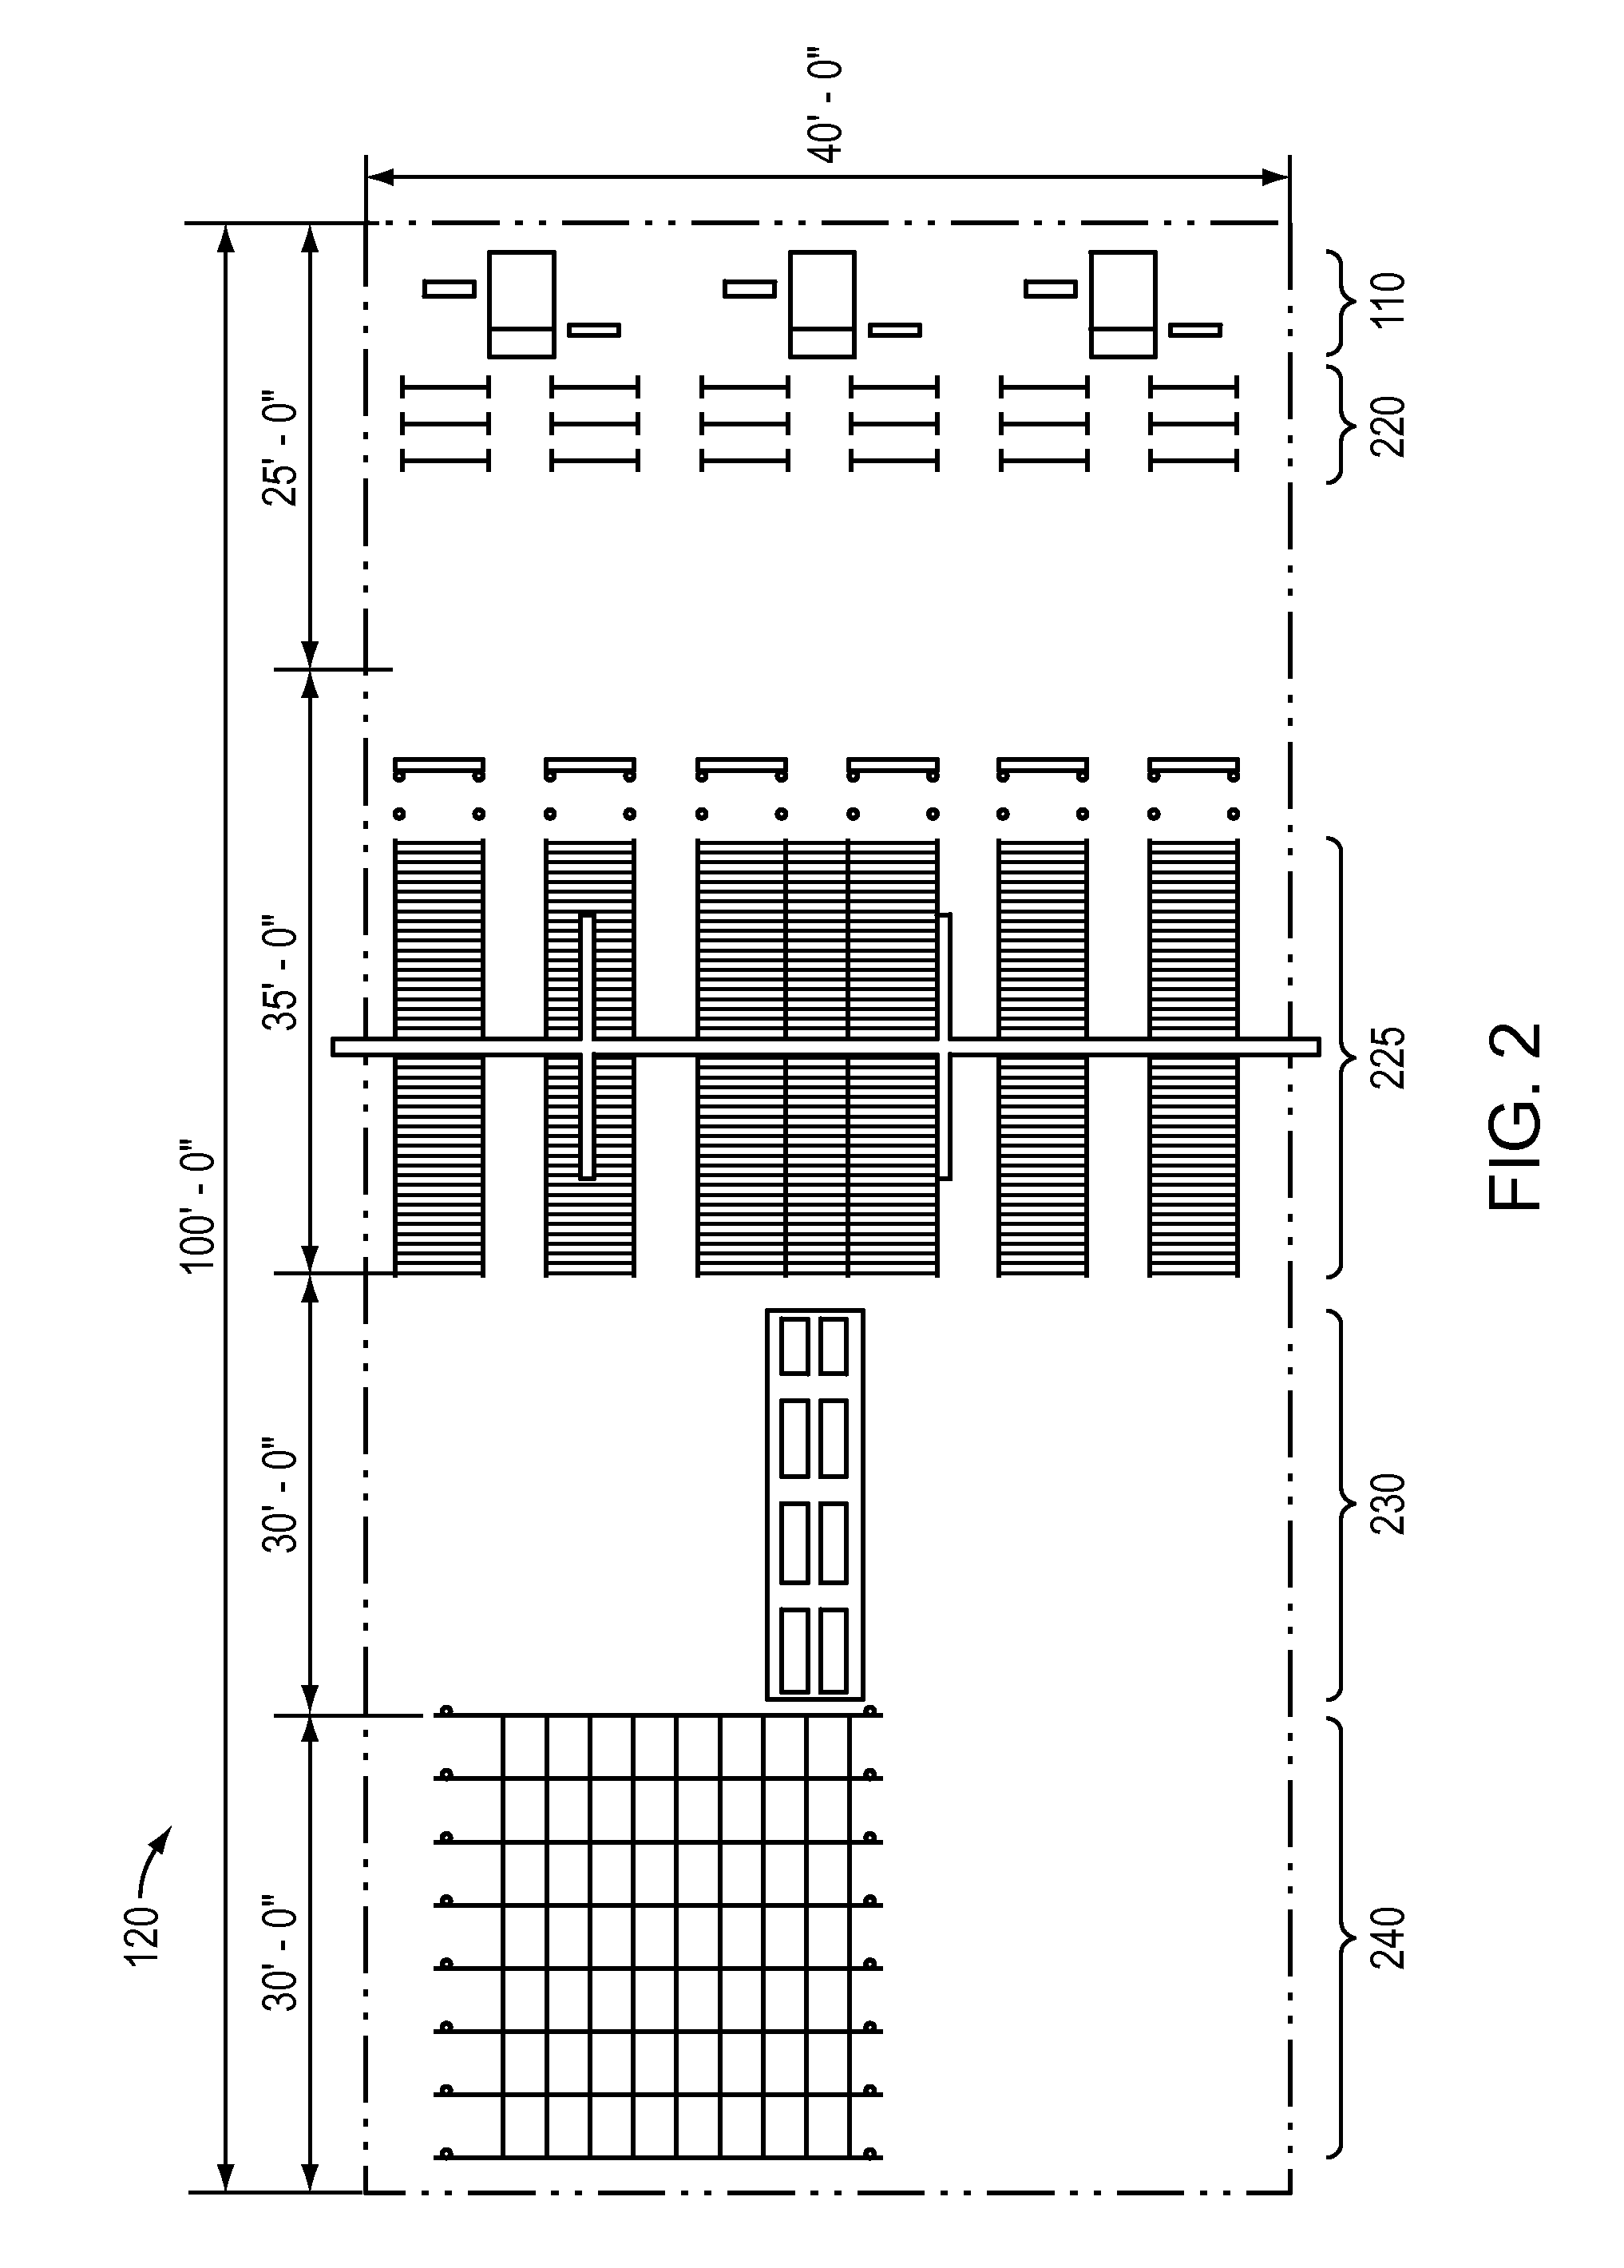 Component manufacturing system for a prefabricated building panel